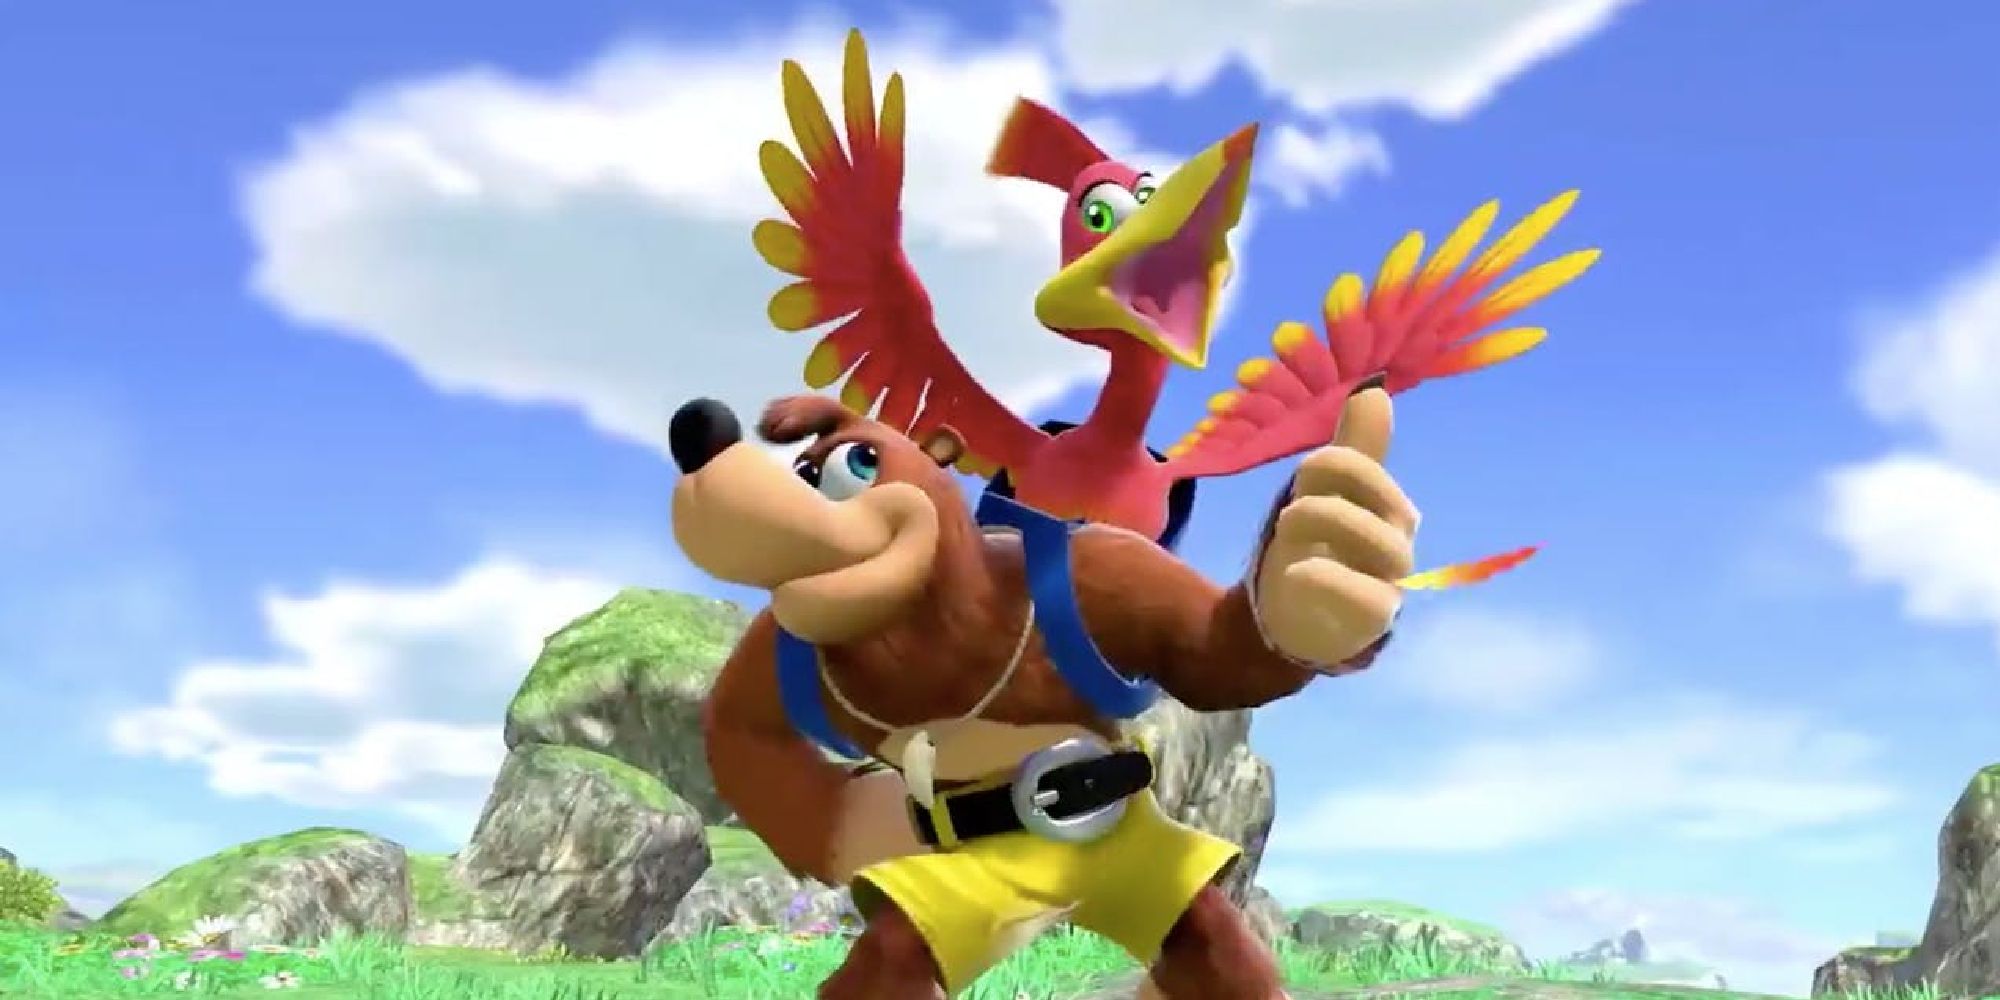 Banjo and Kazooie on Spiral Mountain in Super Smash Bros Ultimate